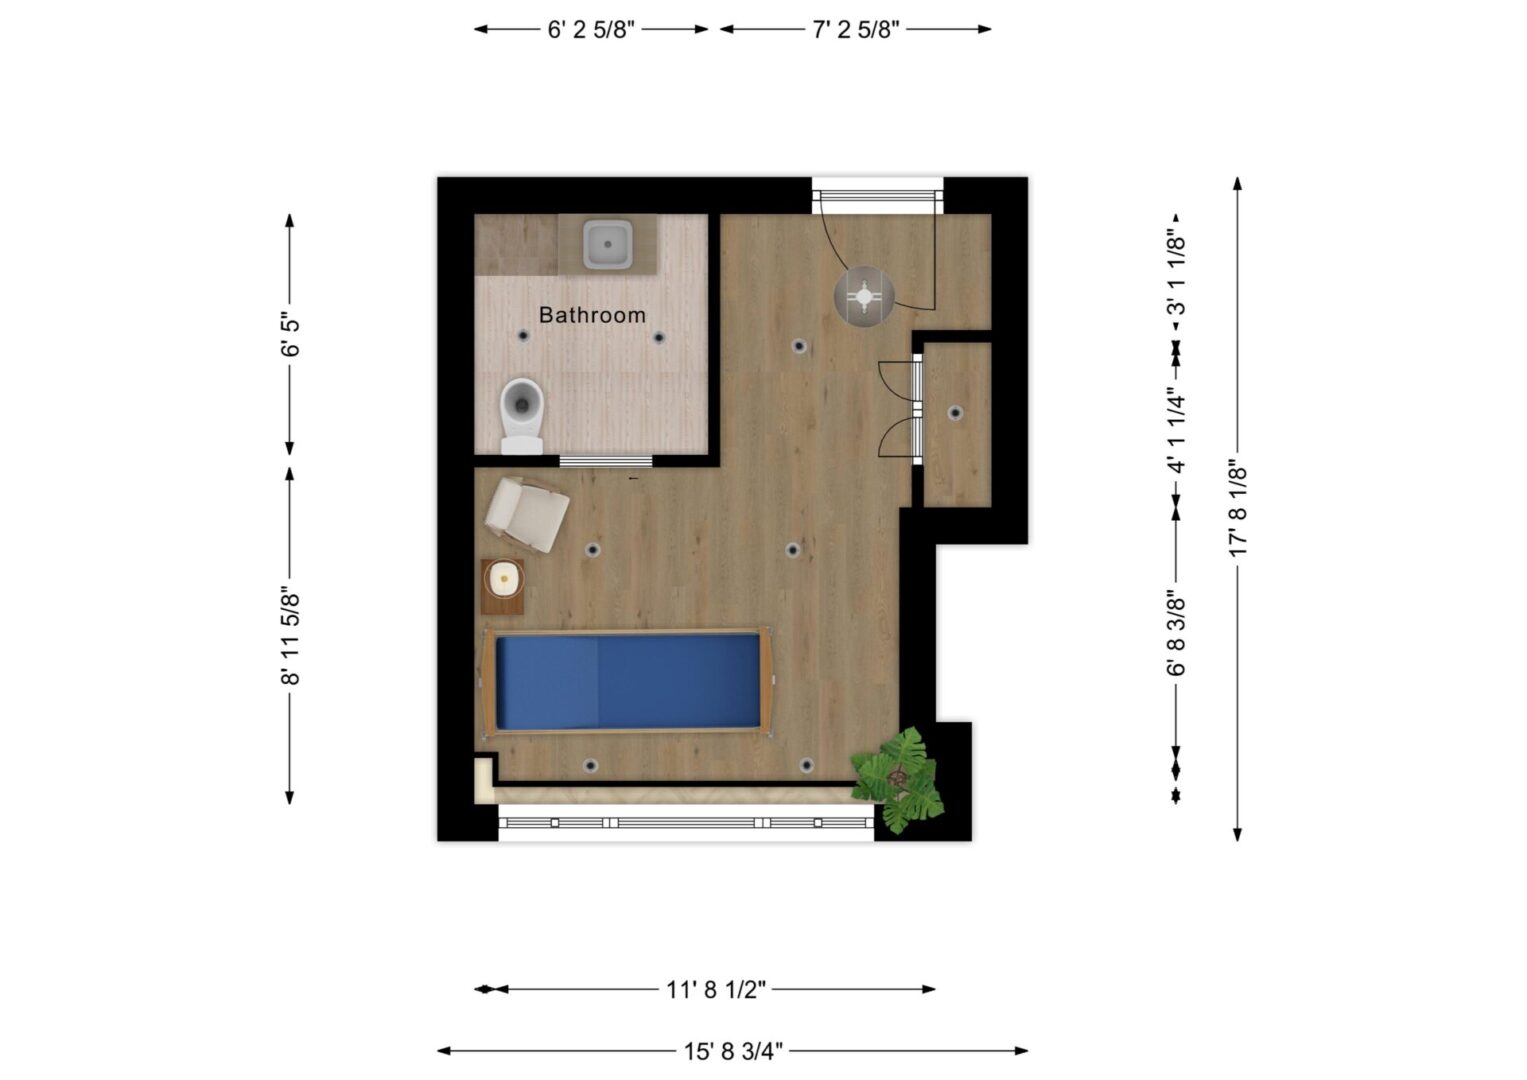 A floor plan of a room with a couch and table.